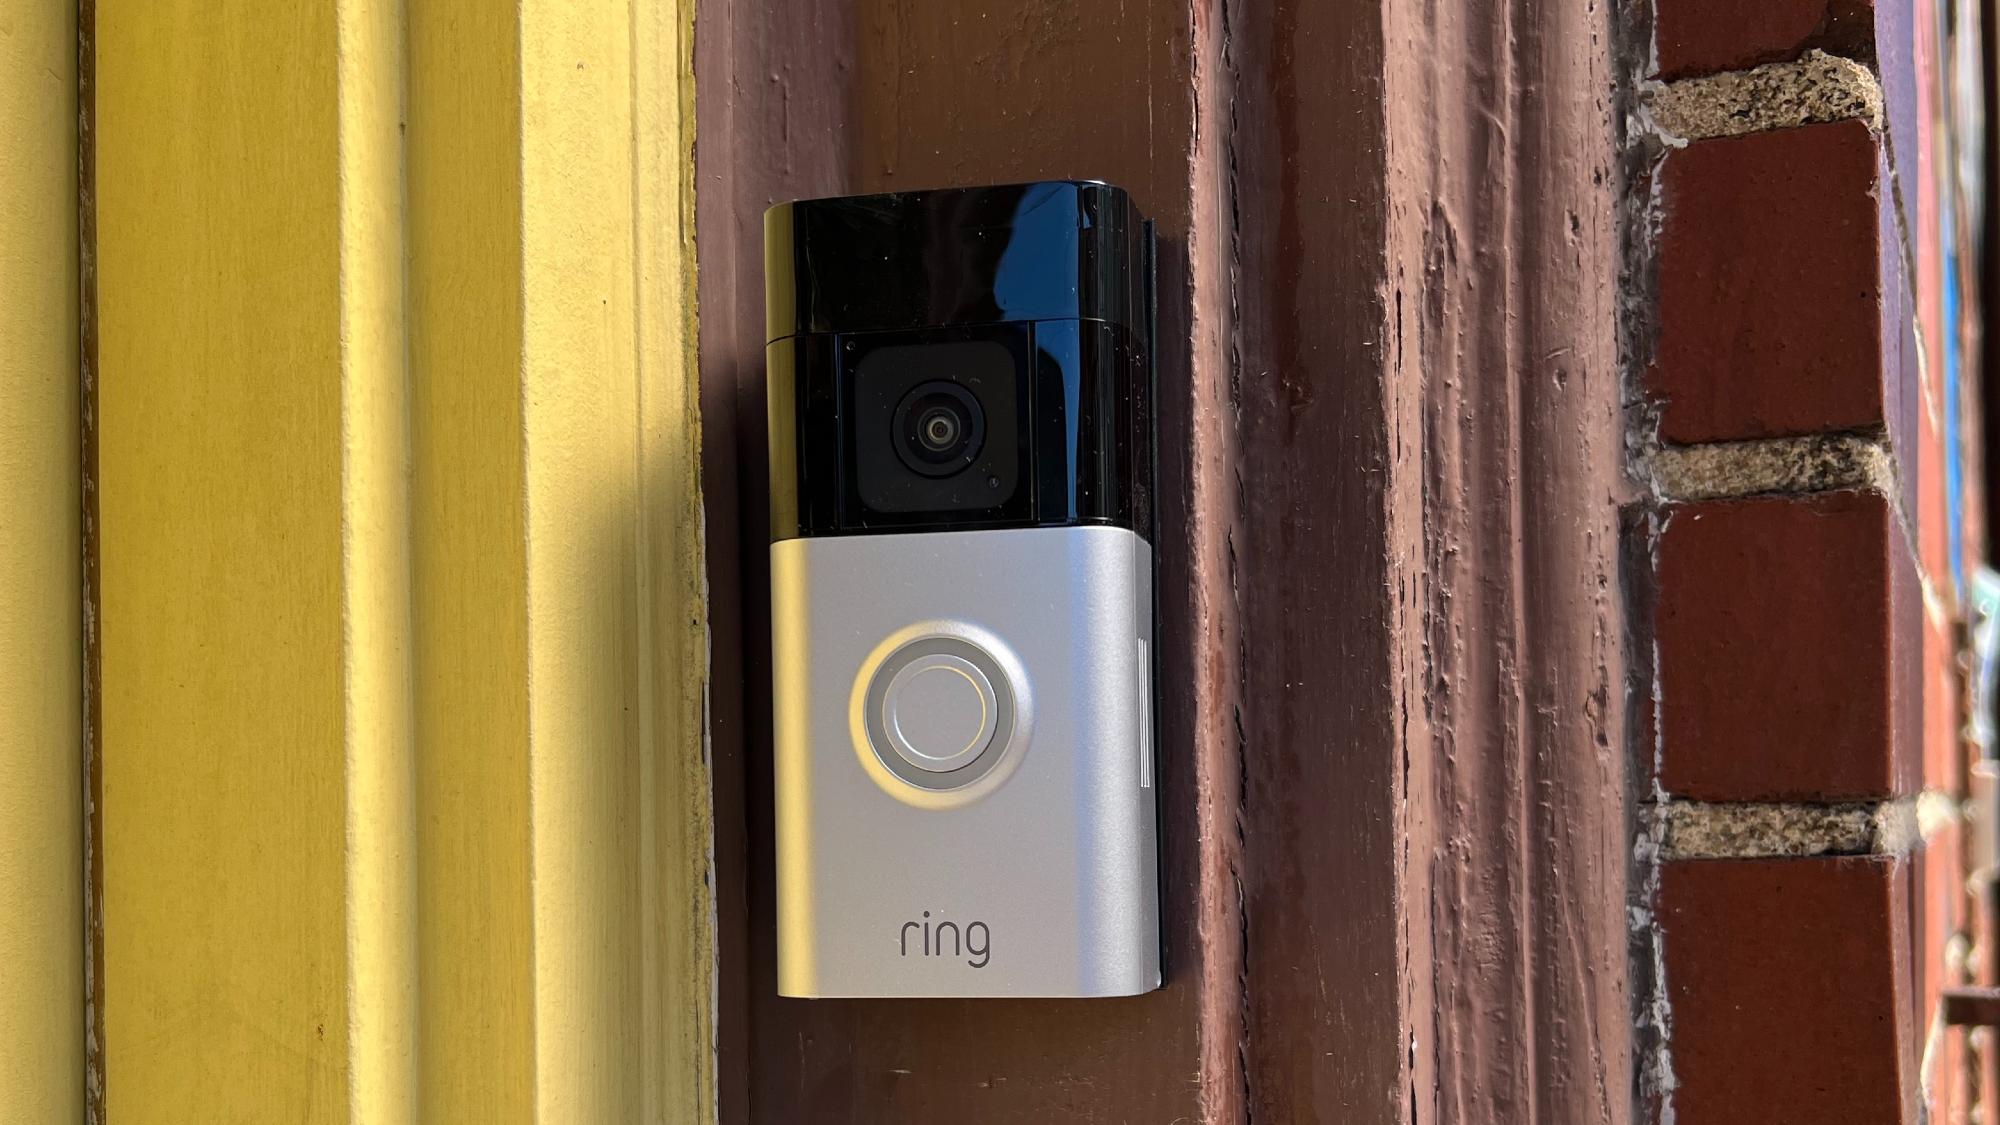 Ring Video Doorbell Wired Compact hardwired video doorbell at Crutchfield